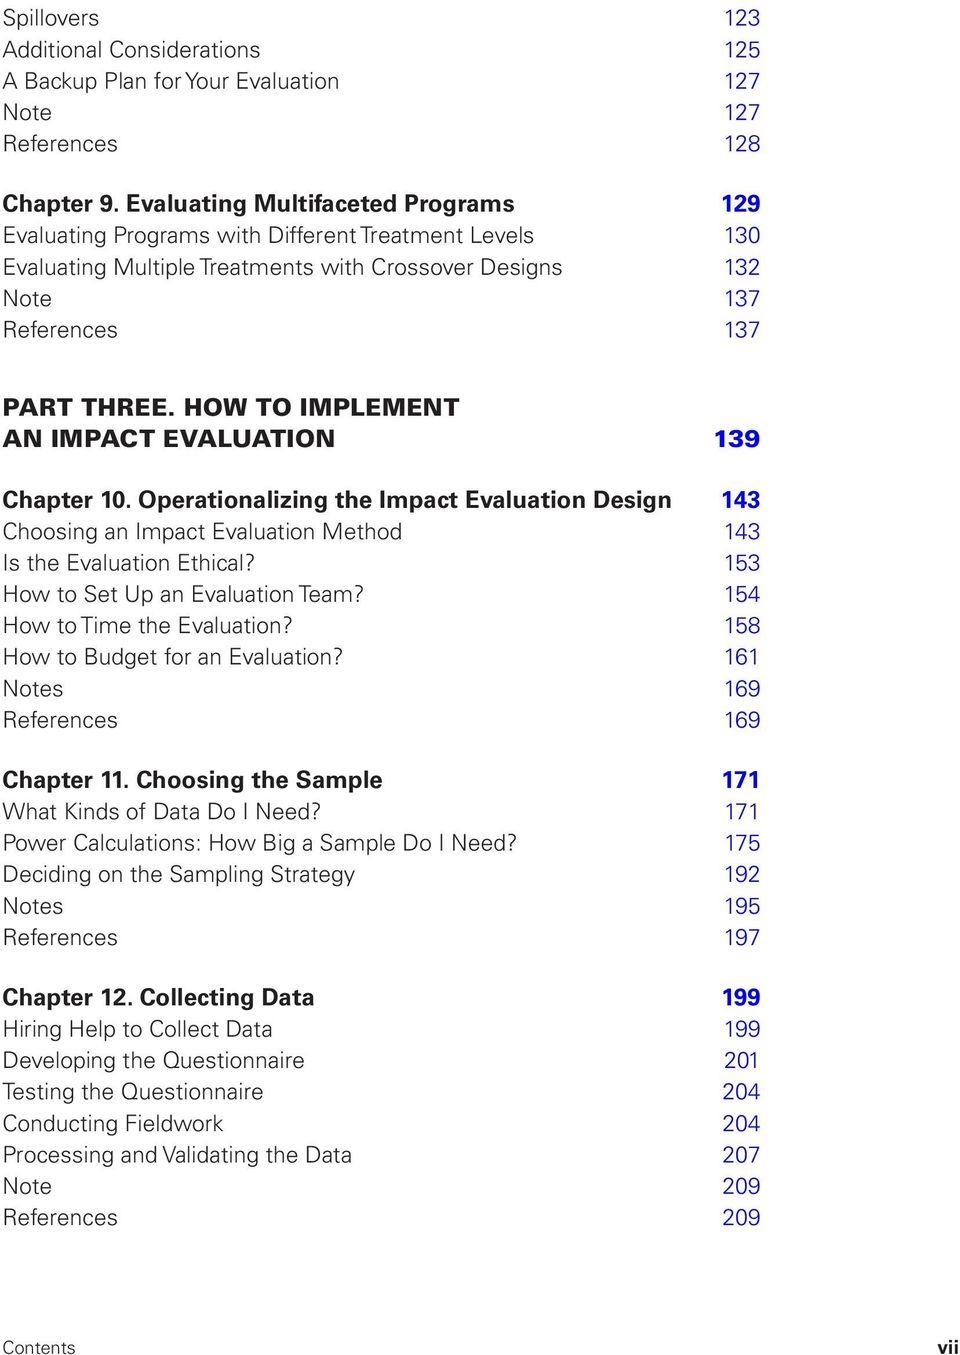 HOW TO IMPLEMENT AN IMPACT EVALUATION 139 Chapter 10. Operationalizing the Impact Evaluation Design 143 Choosing an Impact Evaluation Method 143 Is the Evaluation Ethical?